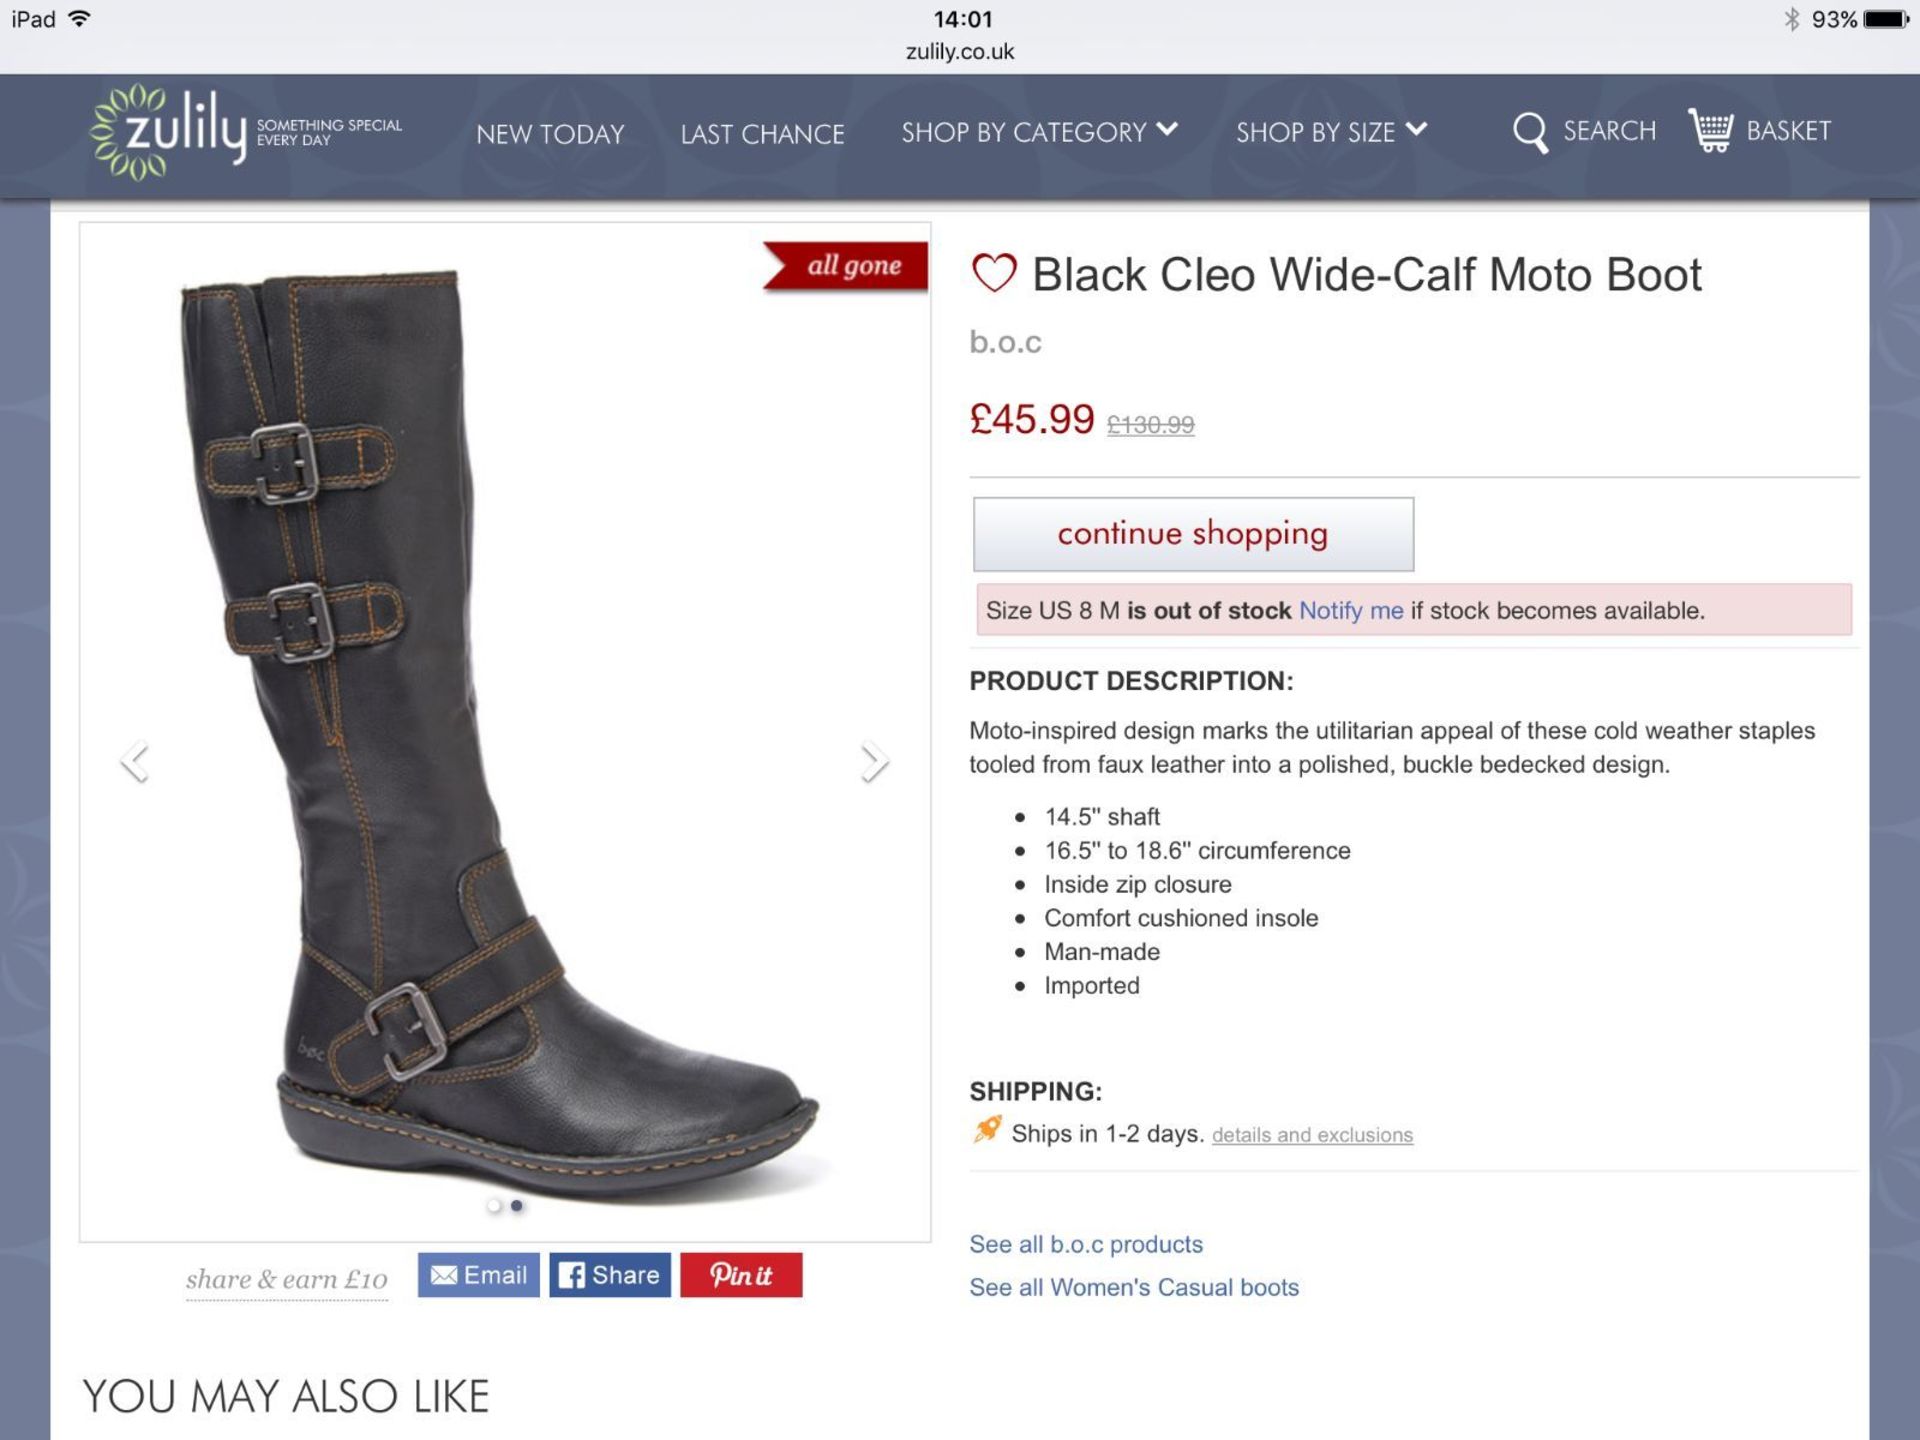 b.o.c. Black Cleo Wide-Calf Moto Boot, Size Eur 38, RRP £130.99 (New with box) - Image 3 of 3